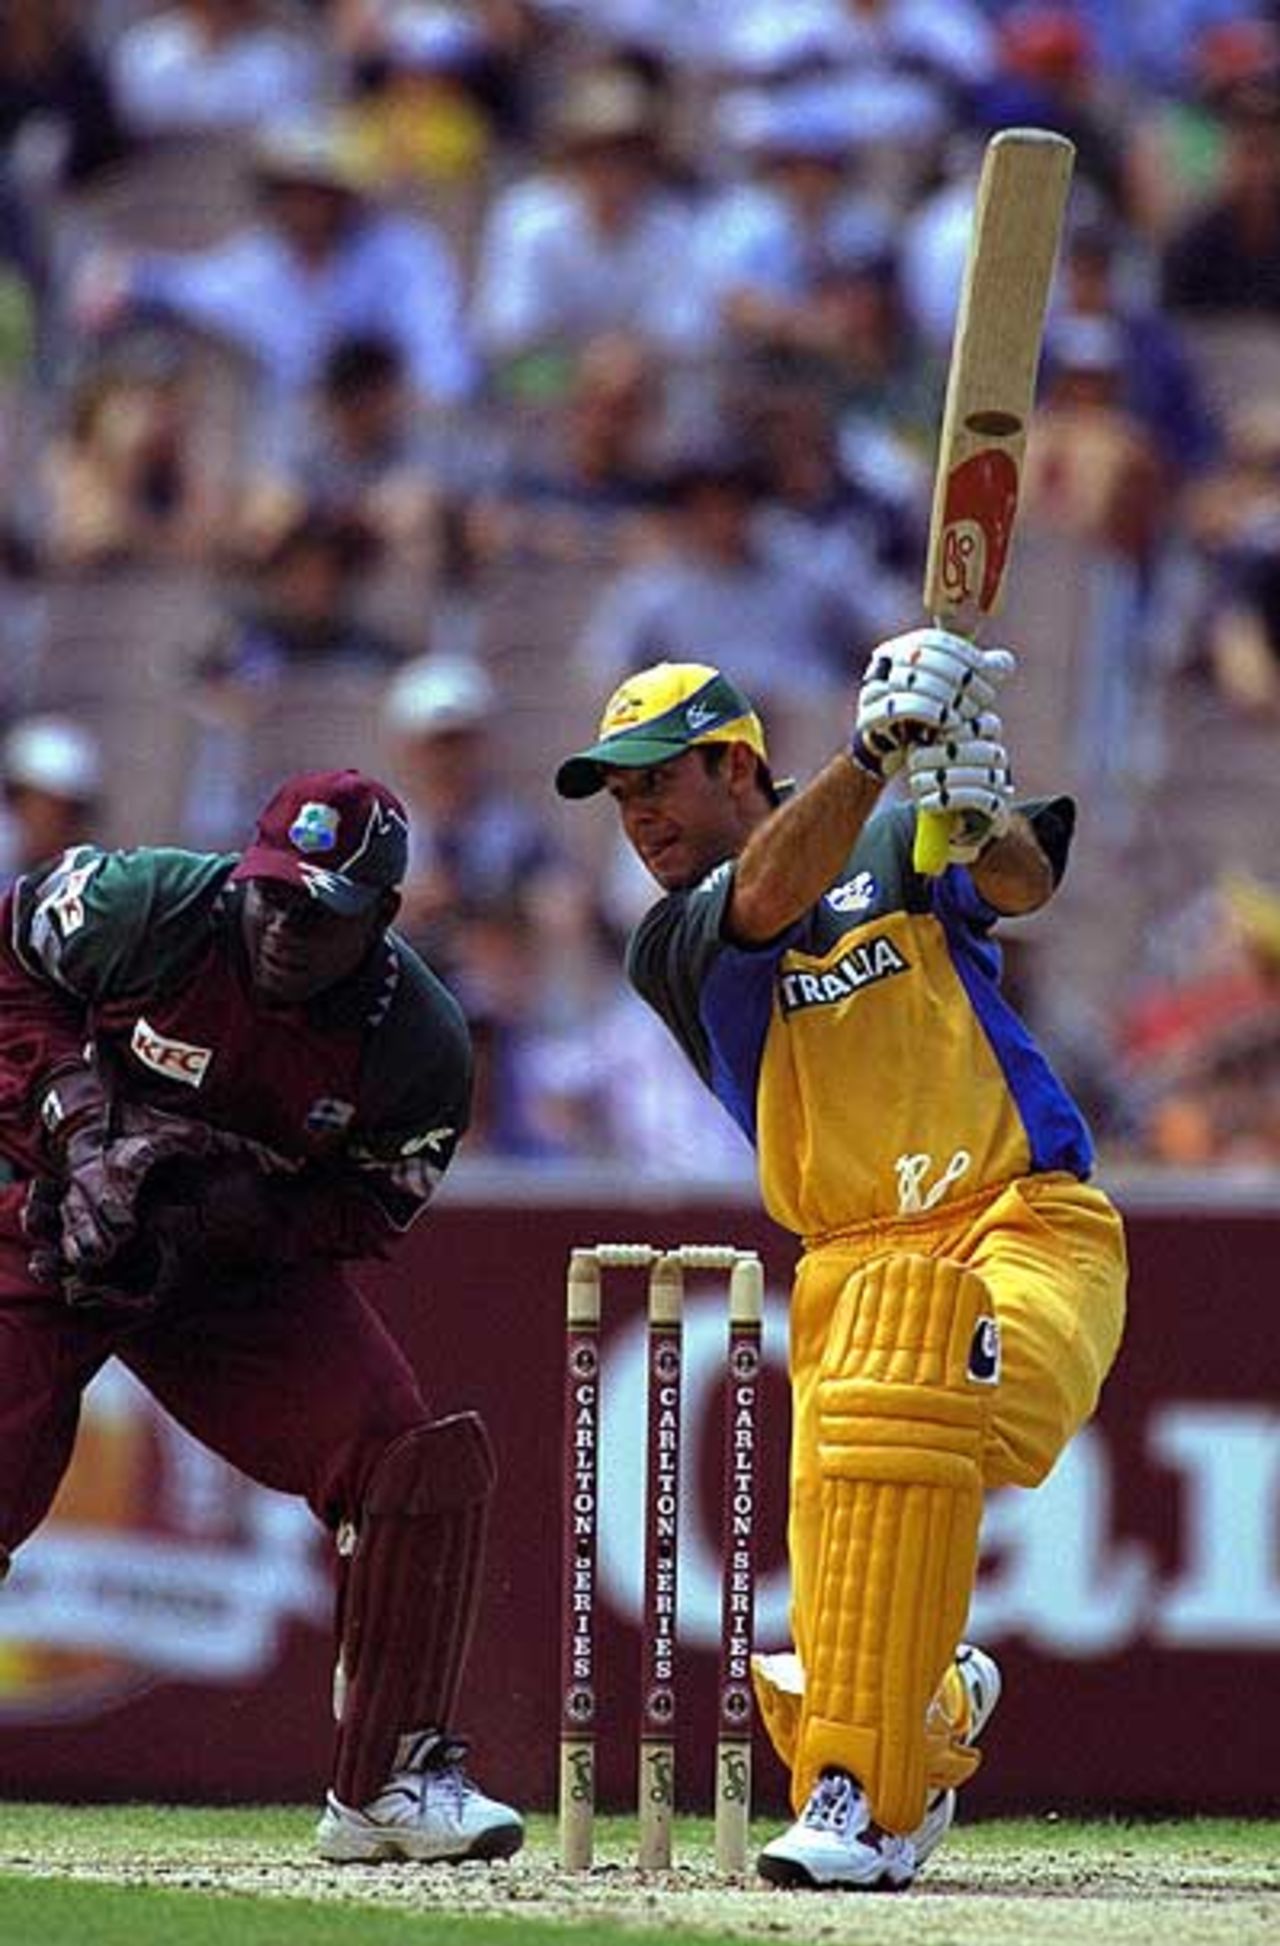 11 Jan 2001: Ricky Ponting of Australia in action, in the Carlton One Day International Series match between Australia and the West Indies, played at the Melbourne Cricket Ground in Melbourne, Australia.